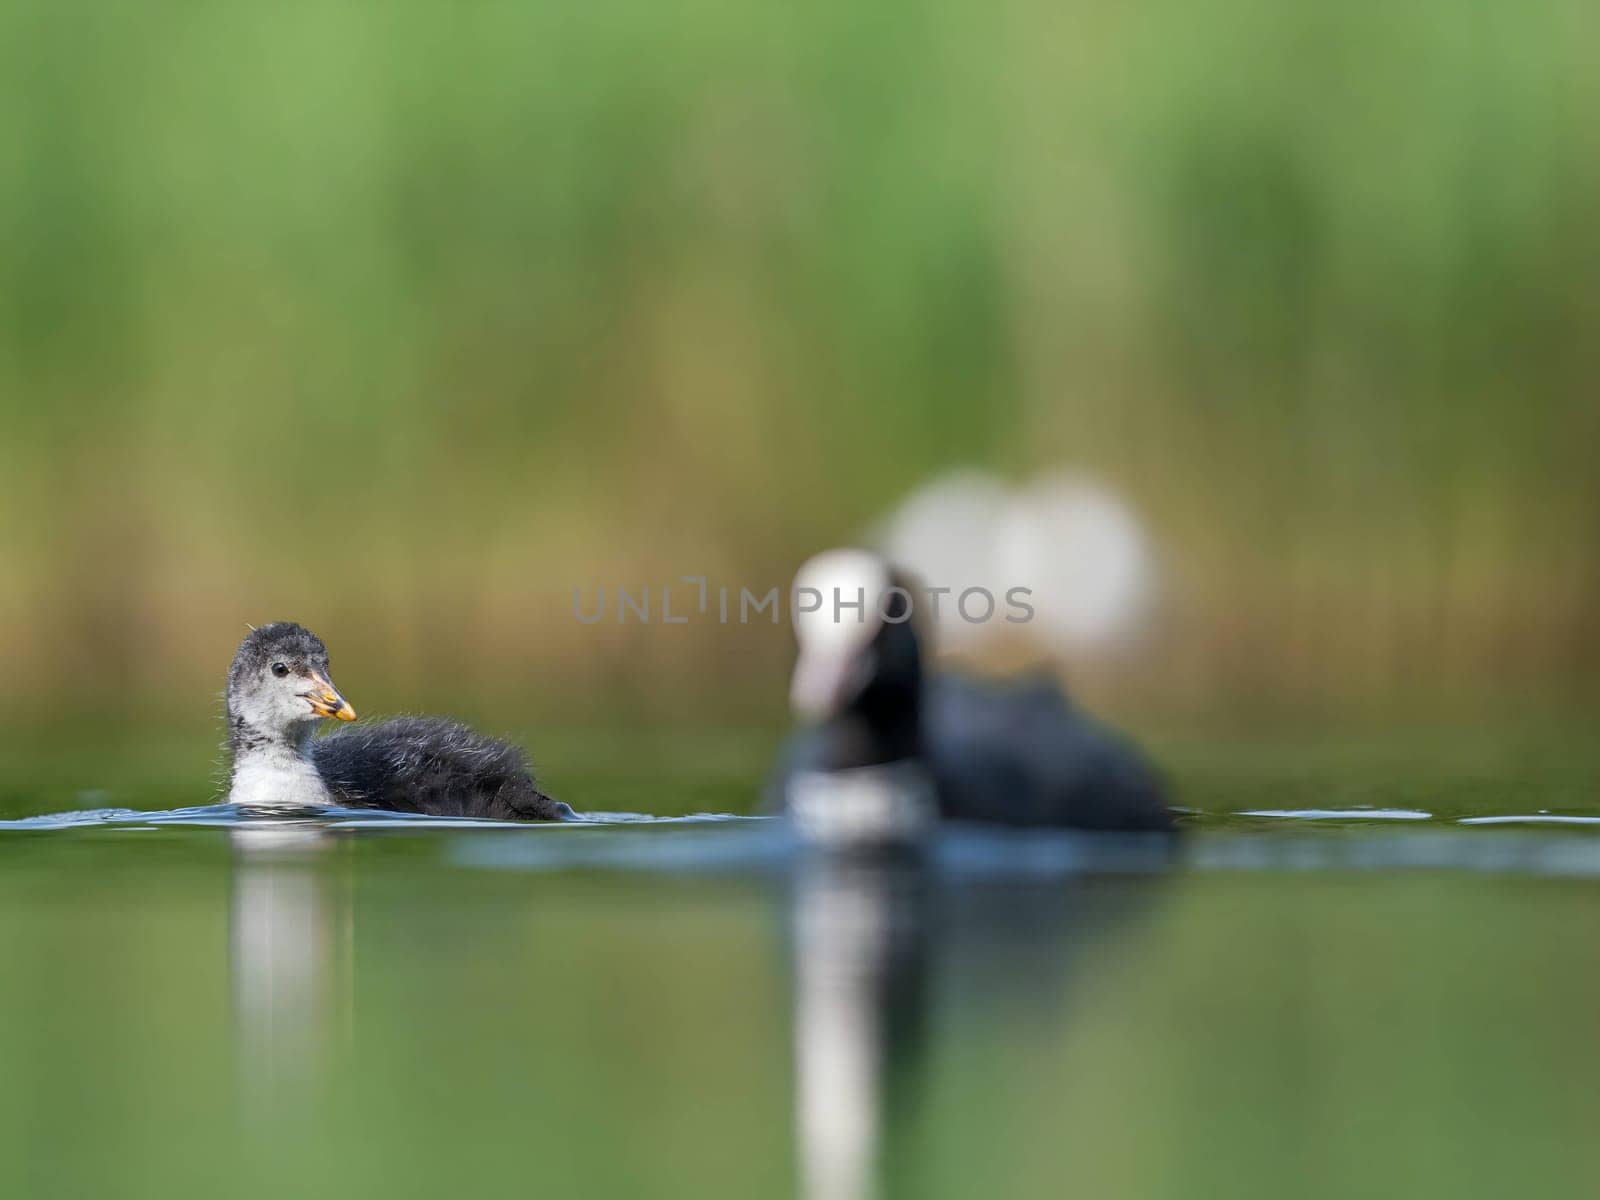 A serene scene unfolds as wild ducks and a Eurasian coot peacefully float on the tranquil waters of a lush green environment, showcasing the beauty of nature.